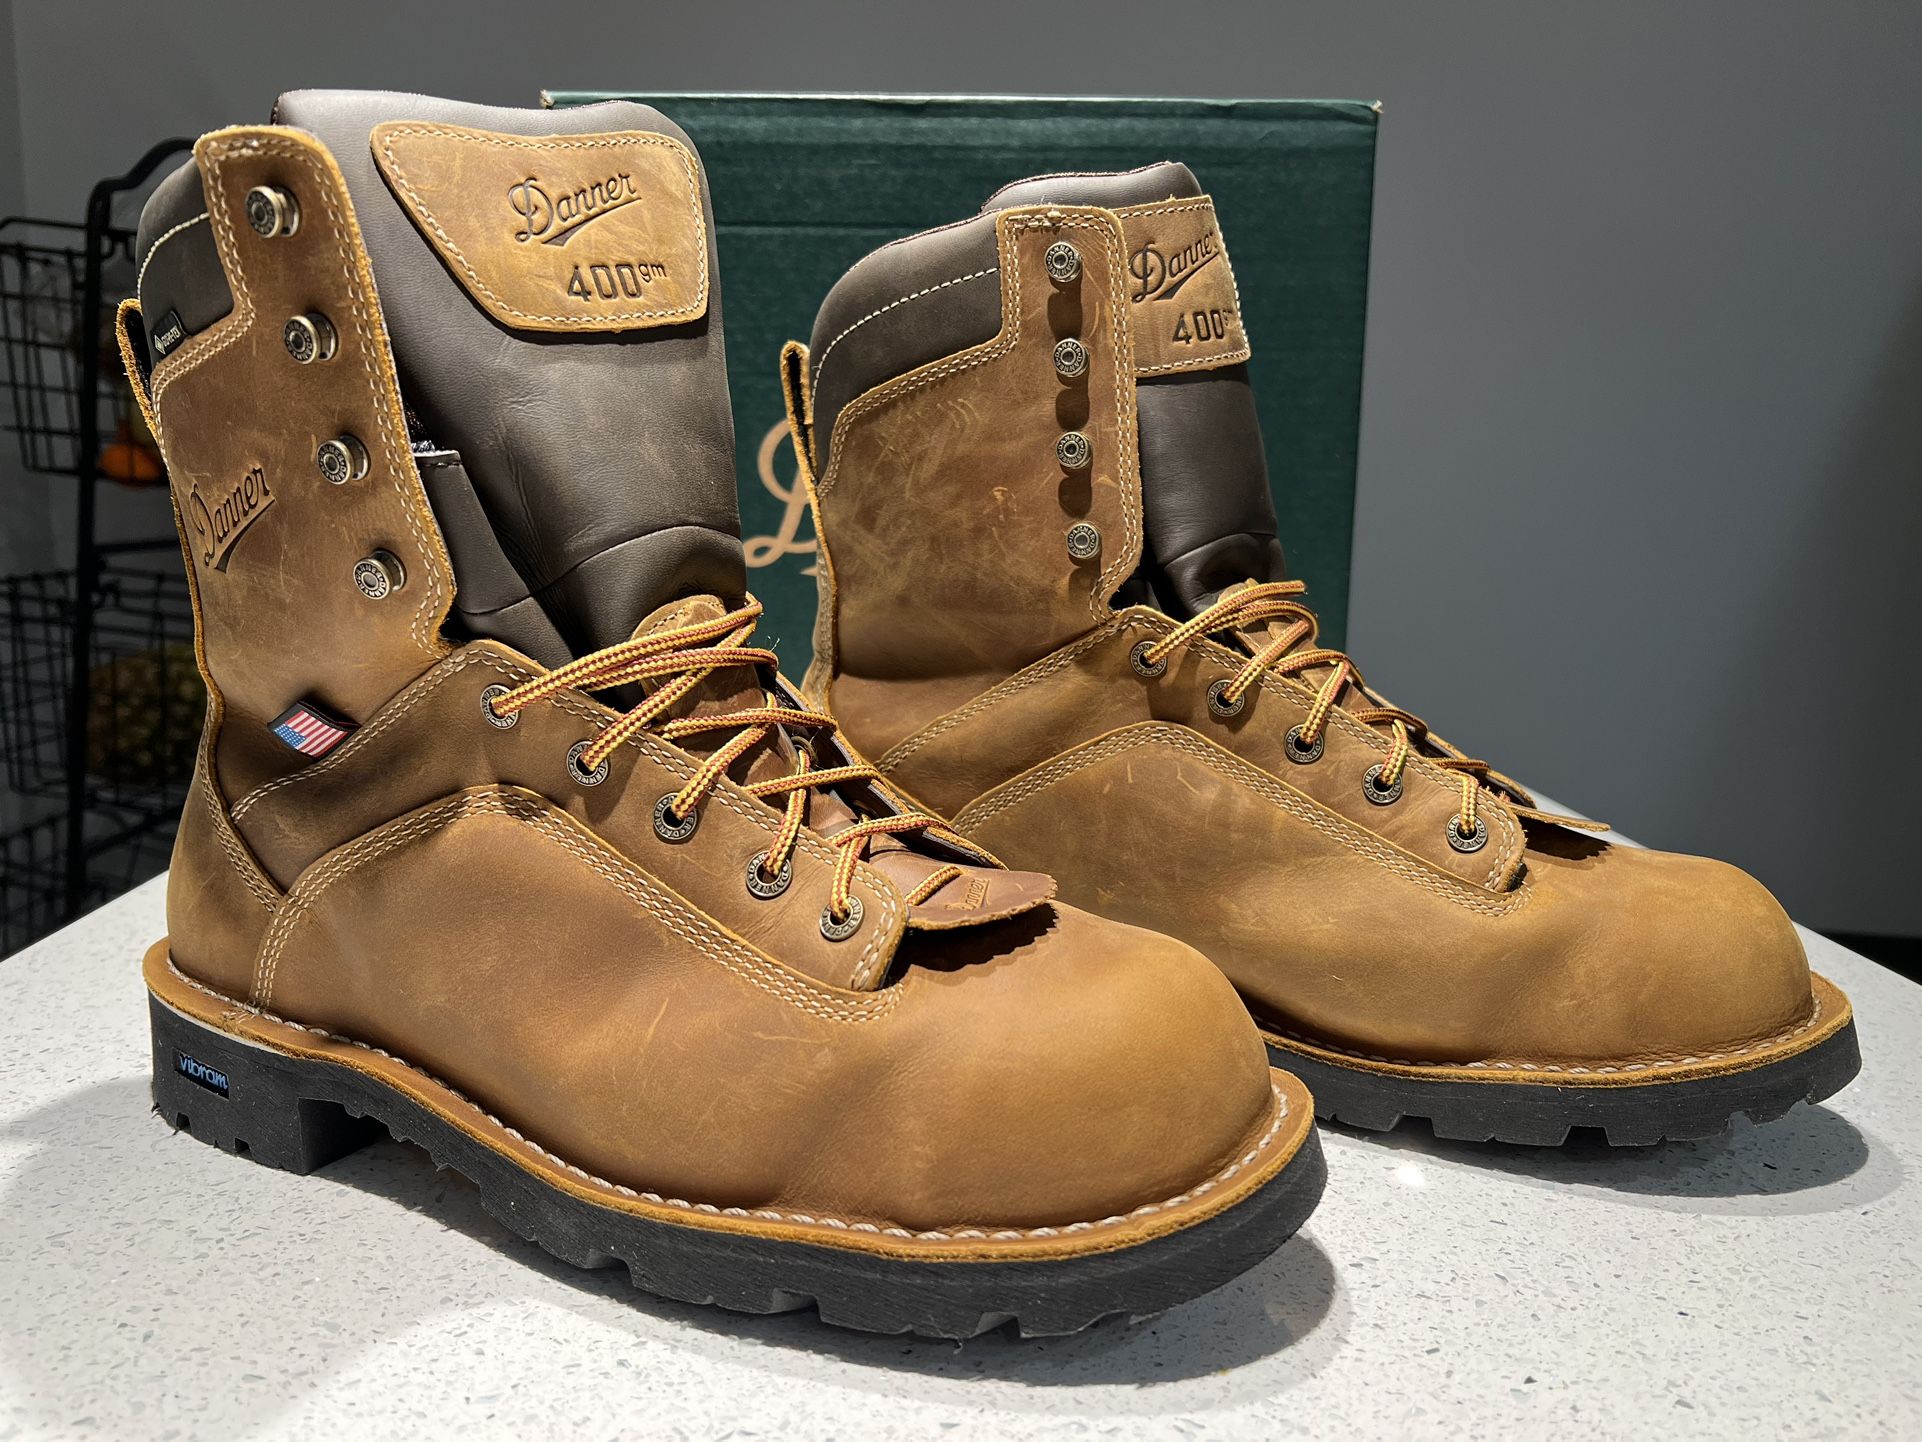 Danner Quarry boots size 11EE Brand New